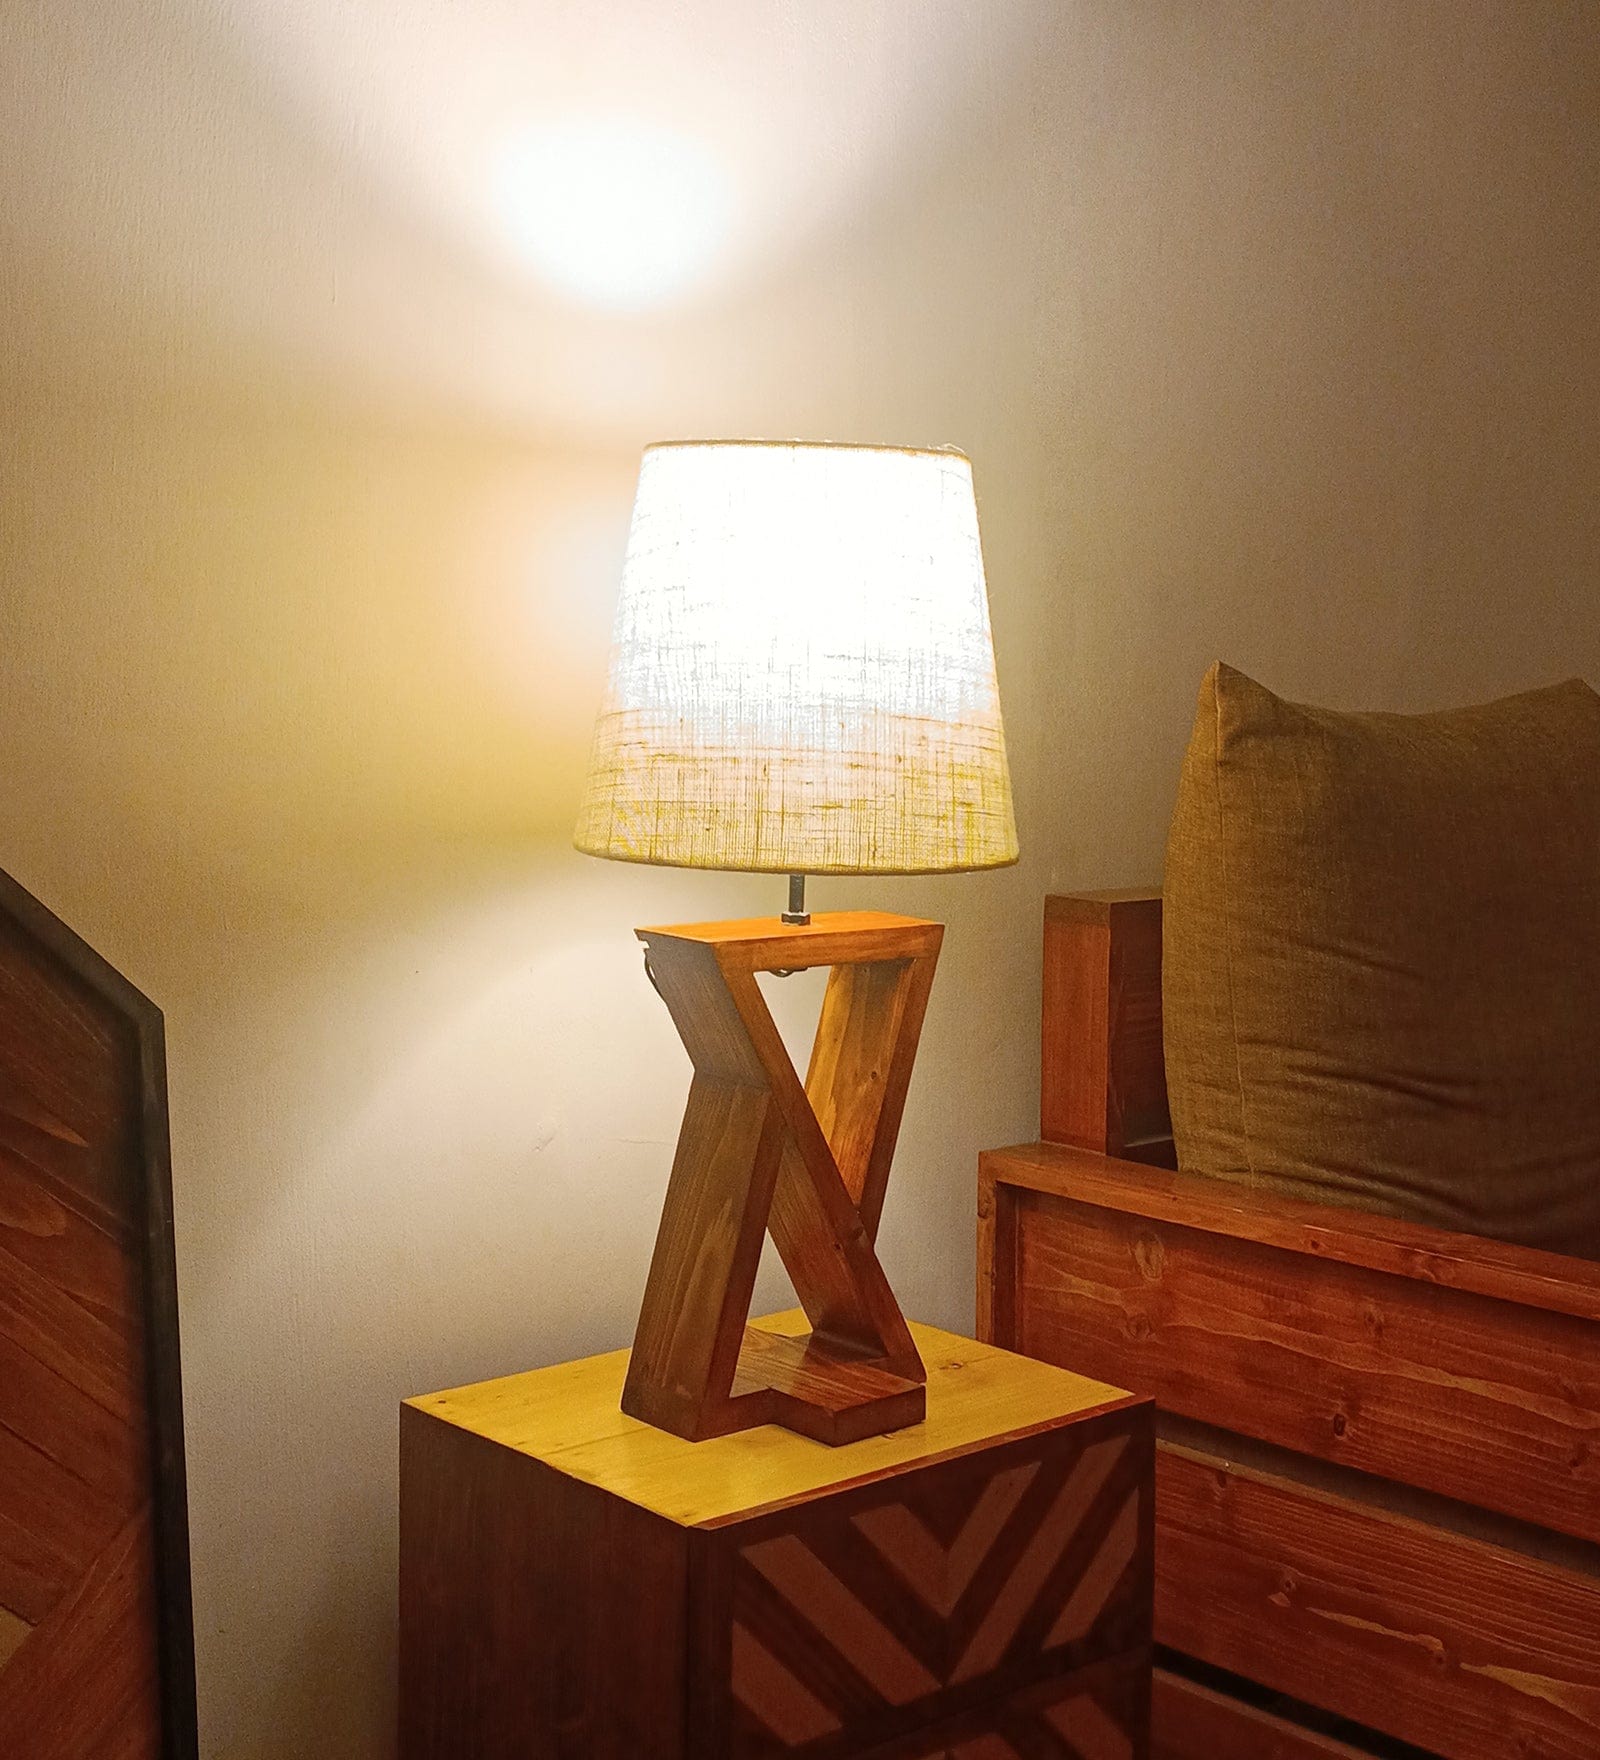 Chloe Brown Wooden Table Lamp with White Jute Lampshade (BULB NOT INCLUDED)